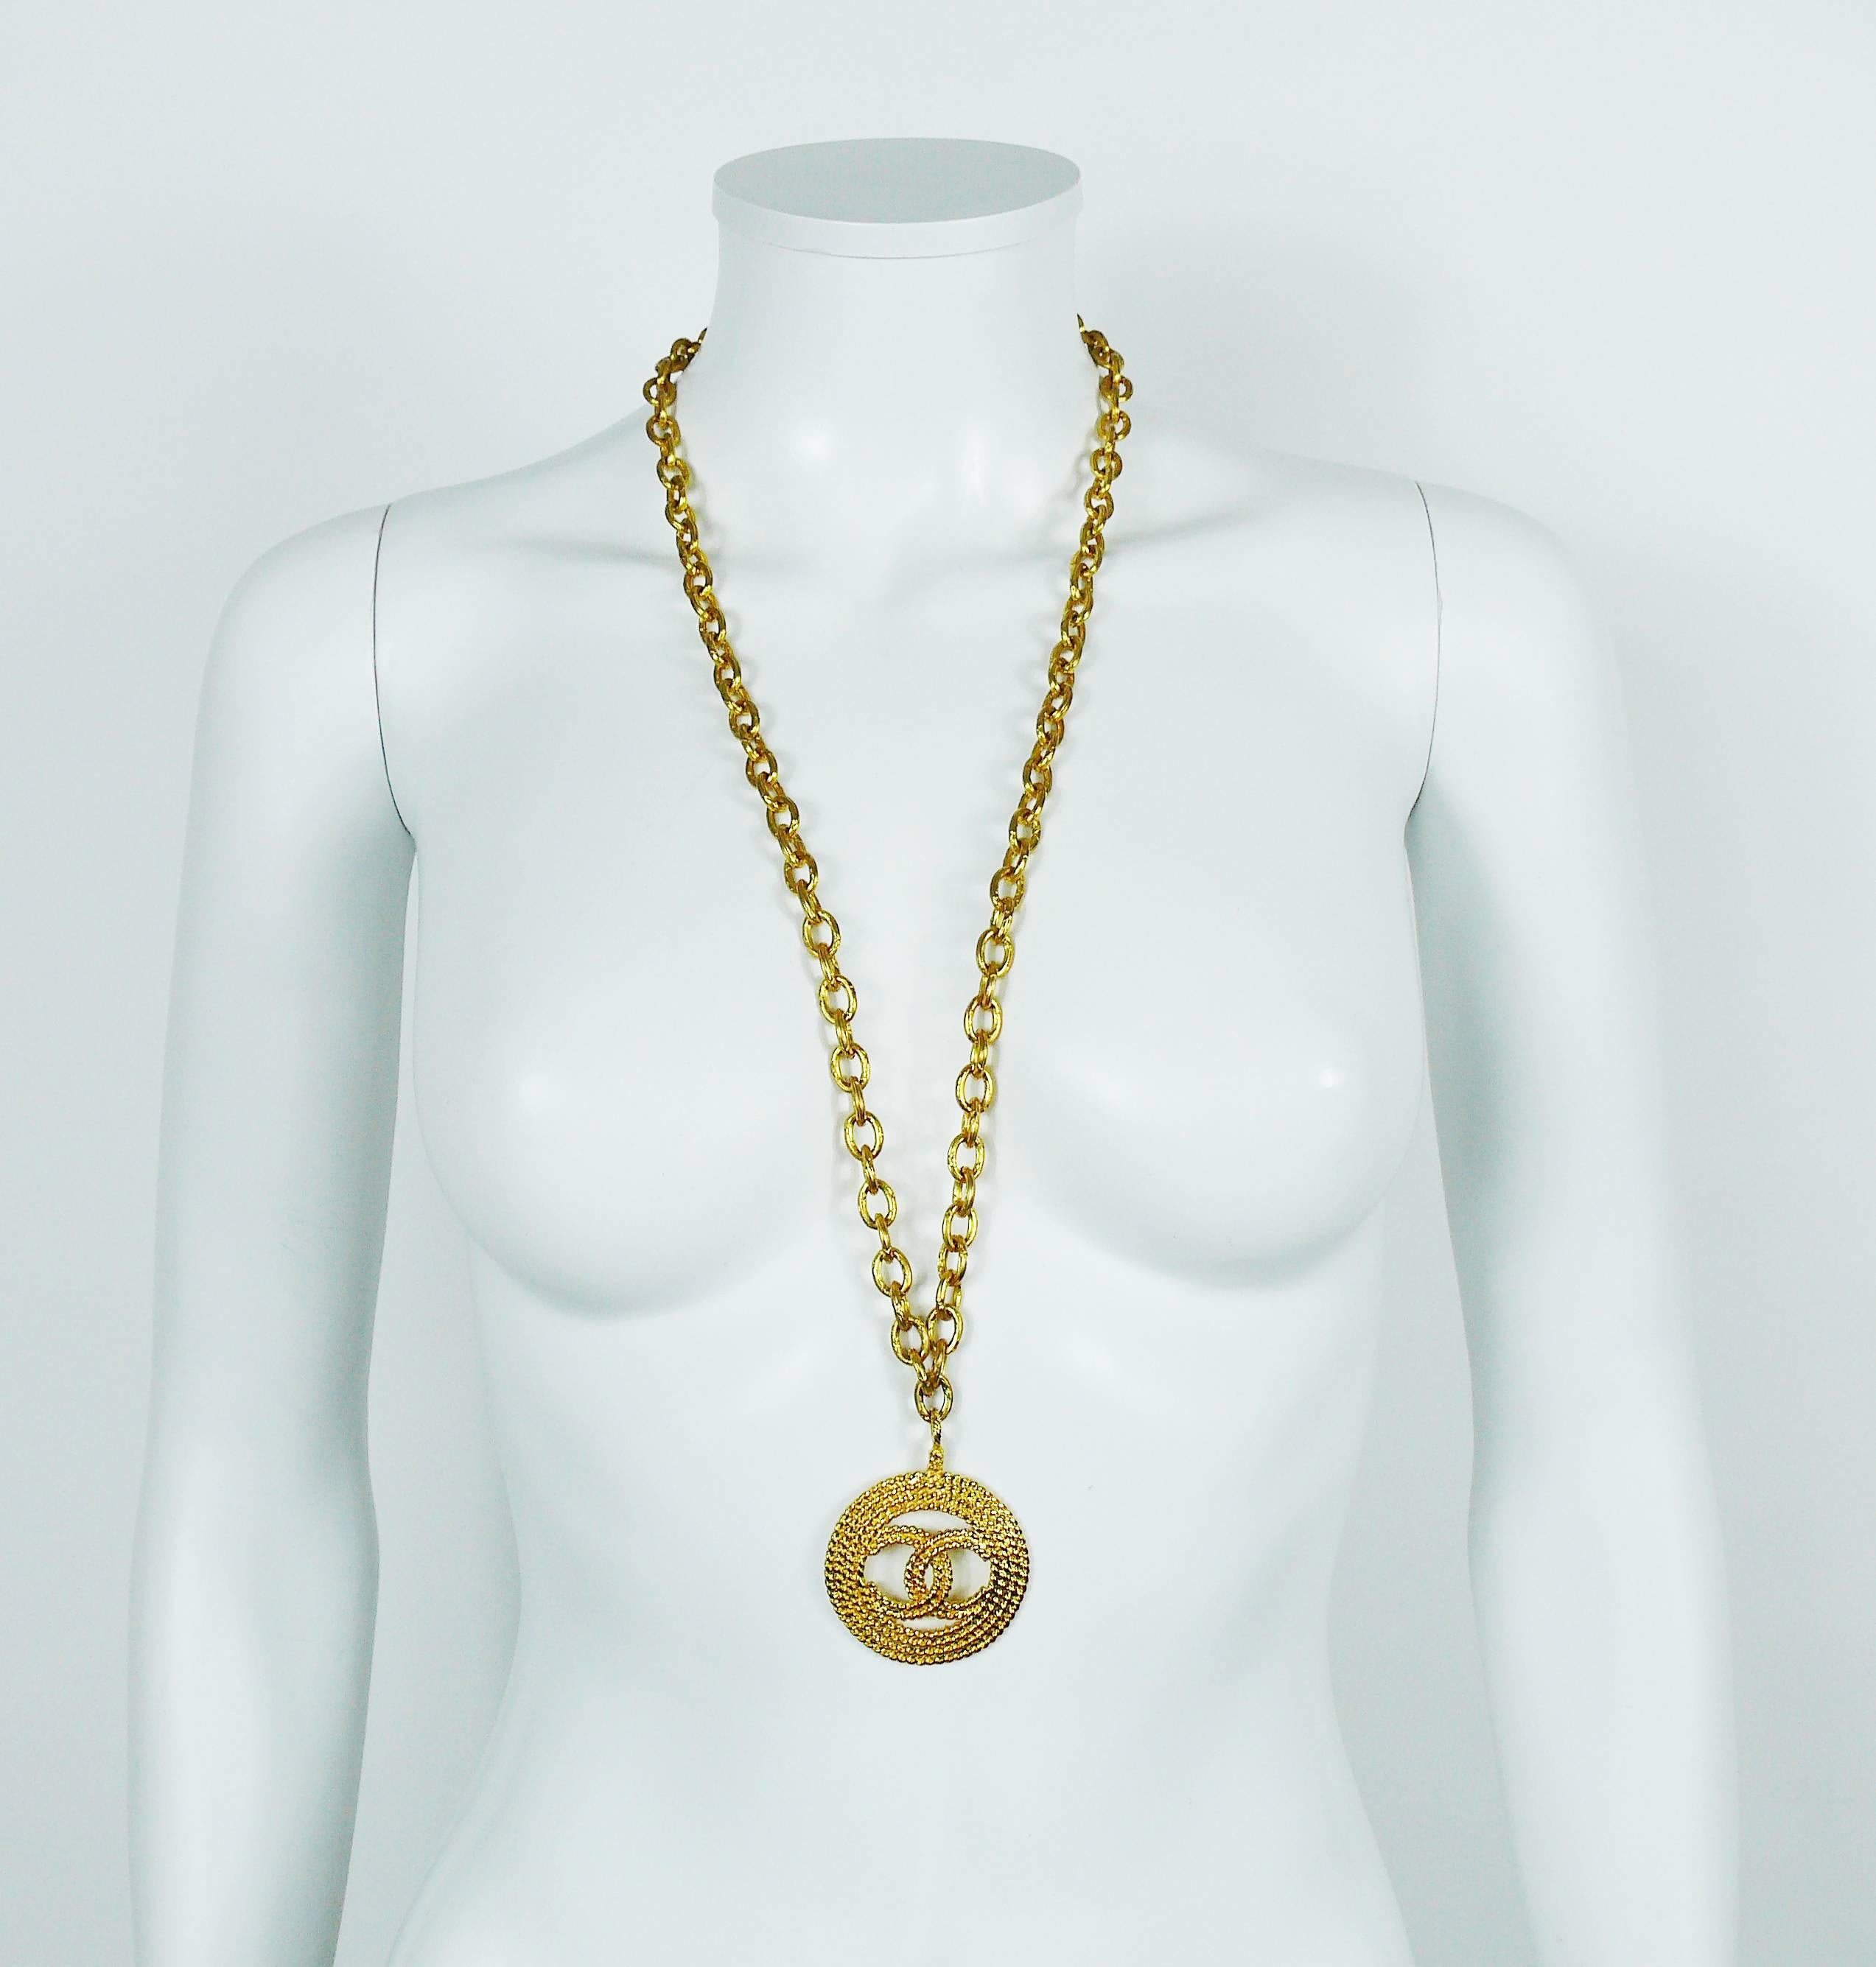 CHANEL vintage 1993 gold toned sautoir necklace featuring a chunky link chain and a round rope-like design CC pendant.

Spring clasp closure.

Marked CHANEL 2 8 Made in France.

Indicative measurements : total length approx. 79 cm (31.10 inches) /